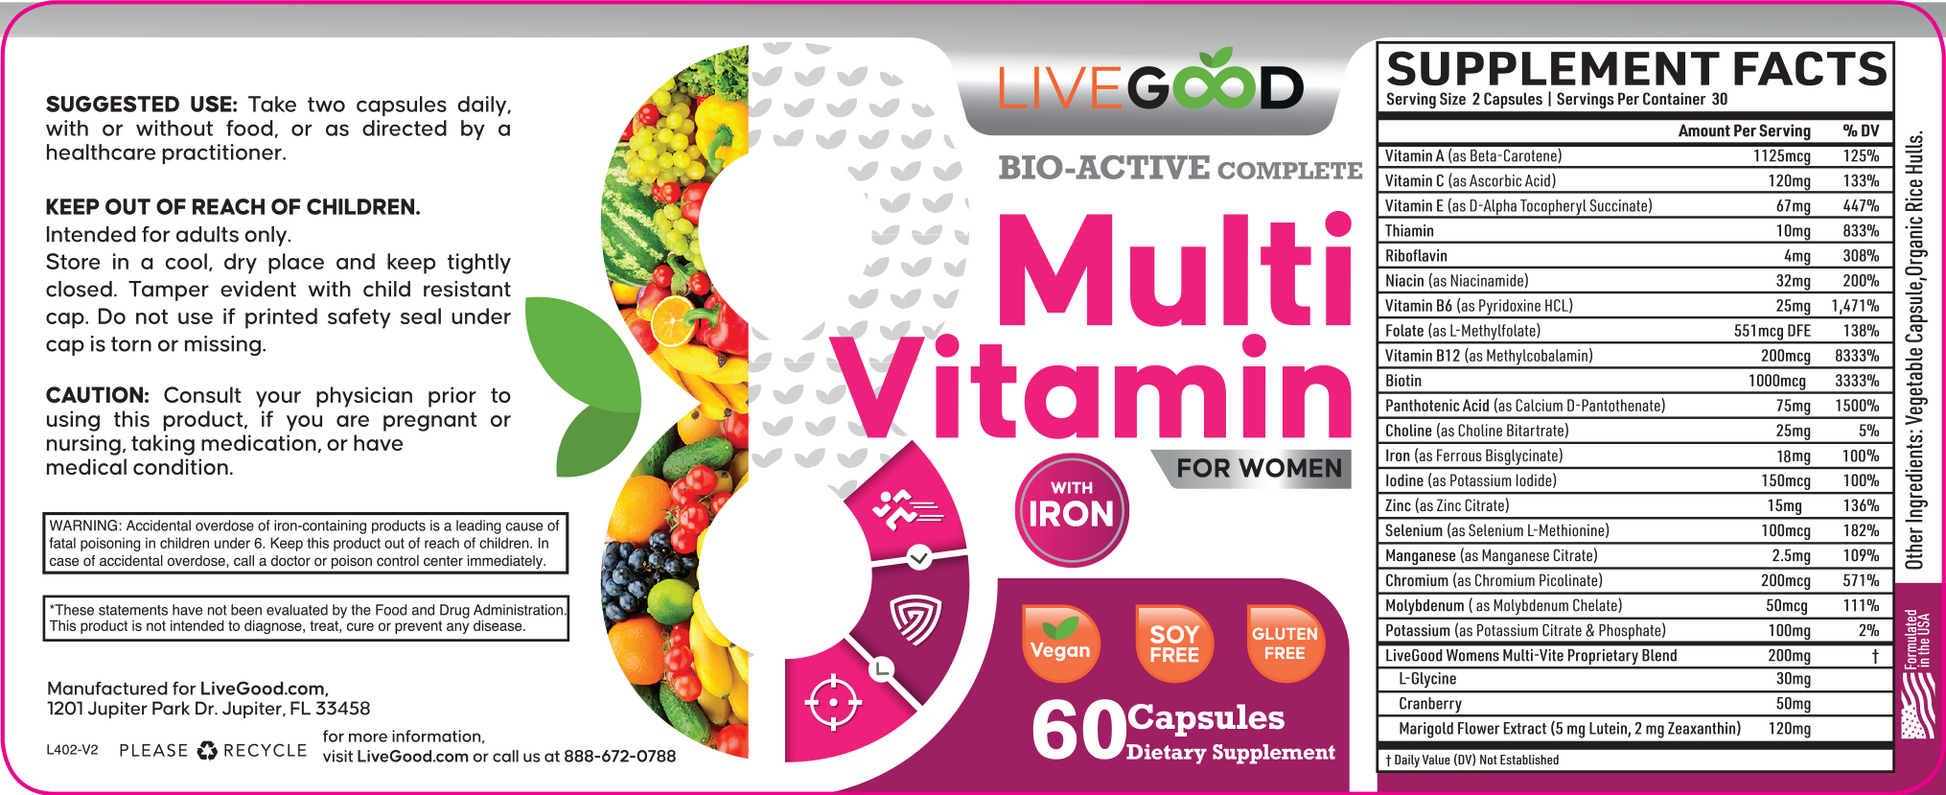 LiveGood Bio-Active Complete Multi-Vitamin for Women with Iron